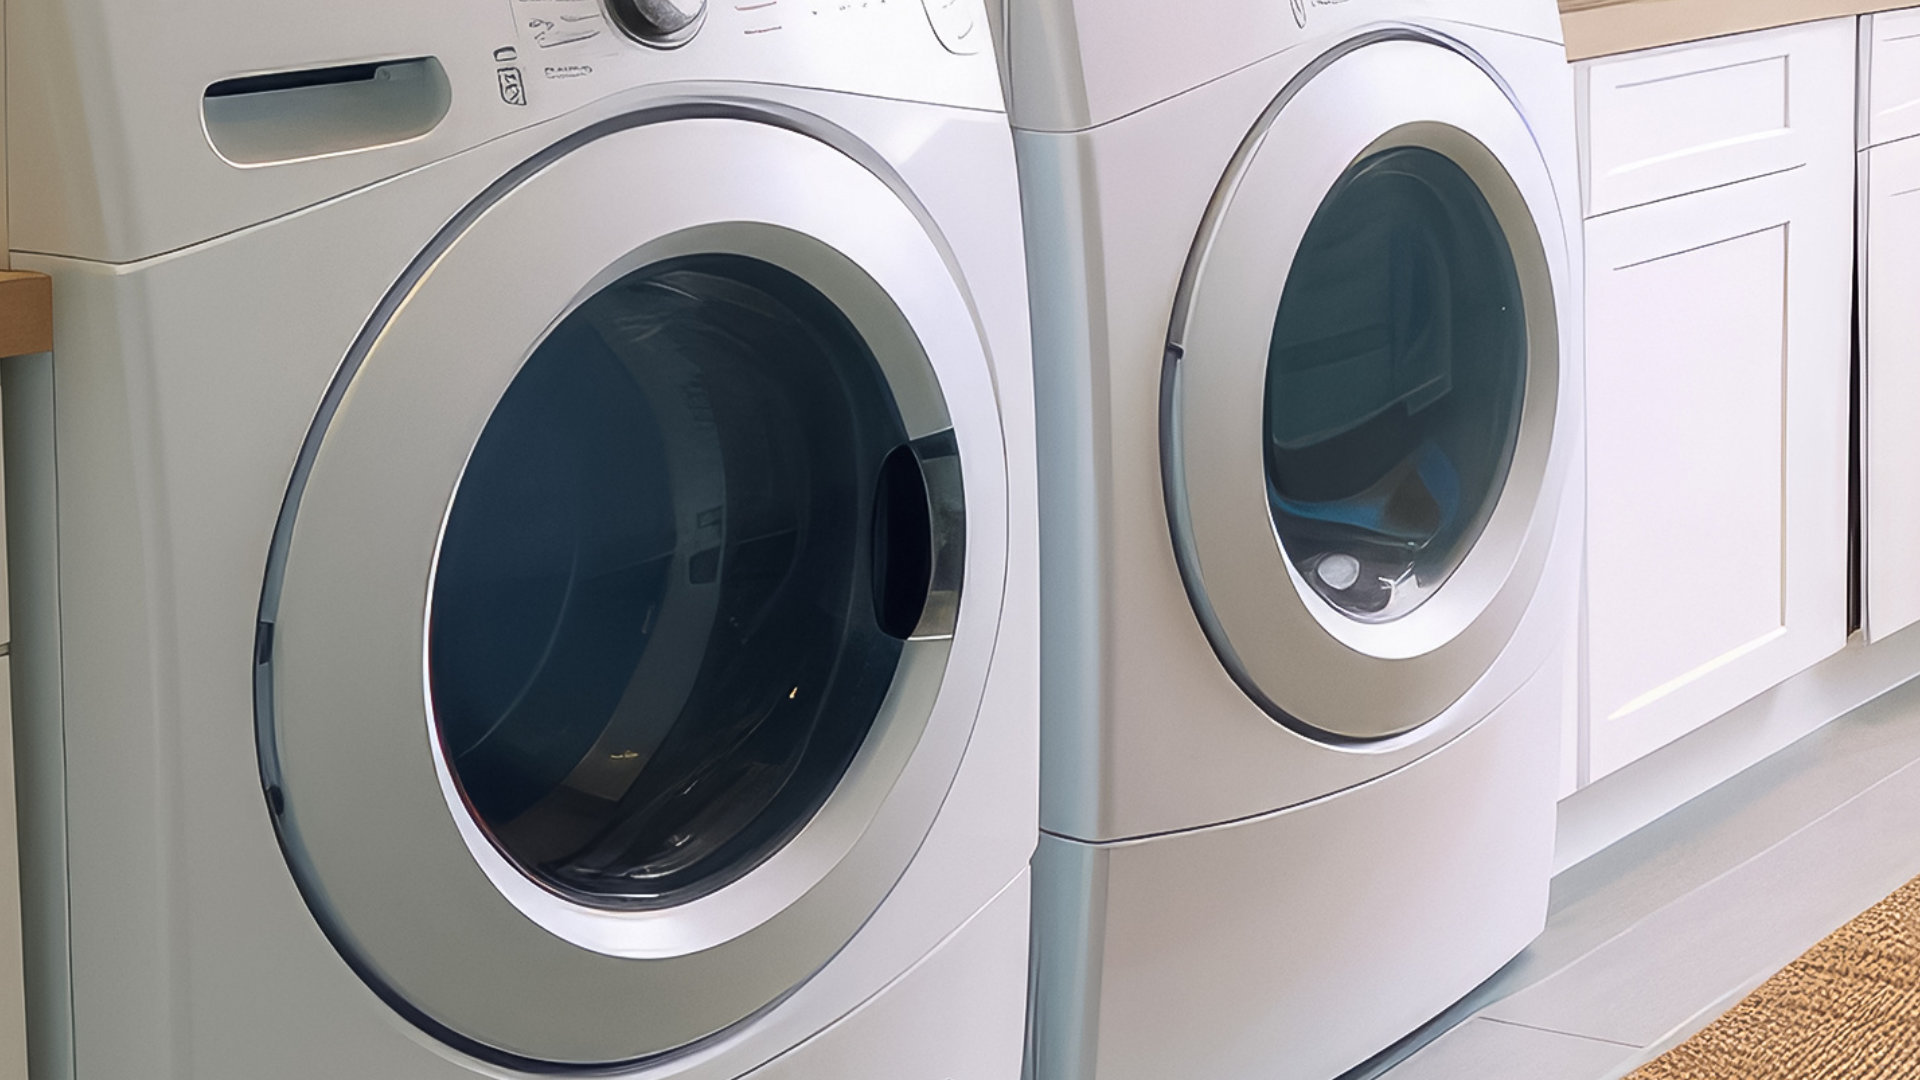 Featured image for “Amana Washer Not Spinning? Here’s Why”